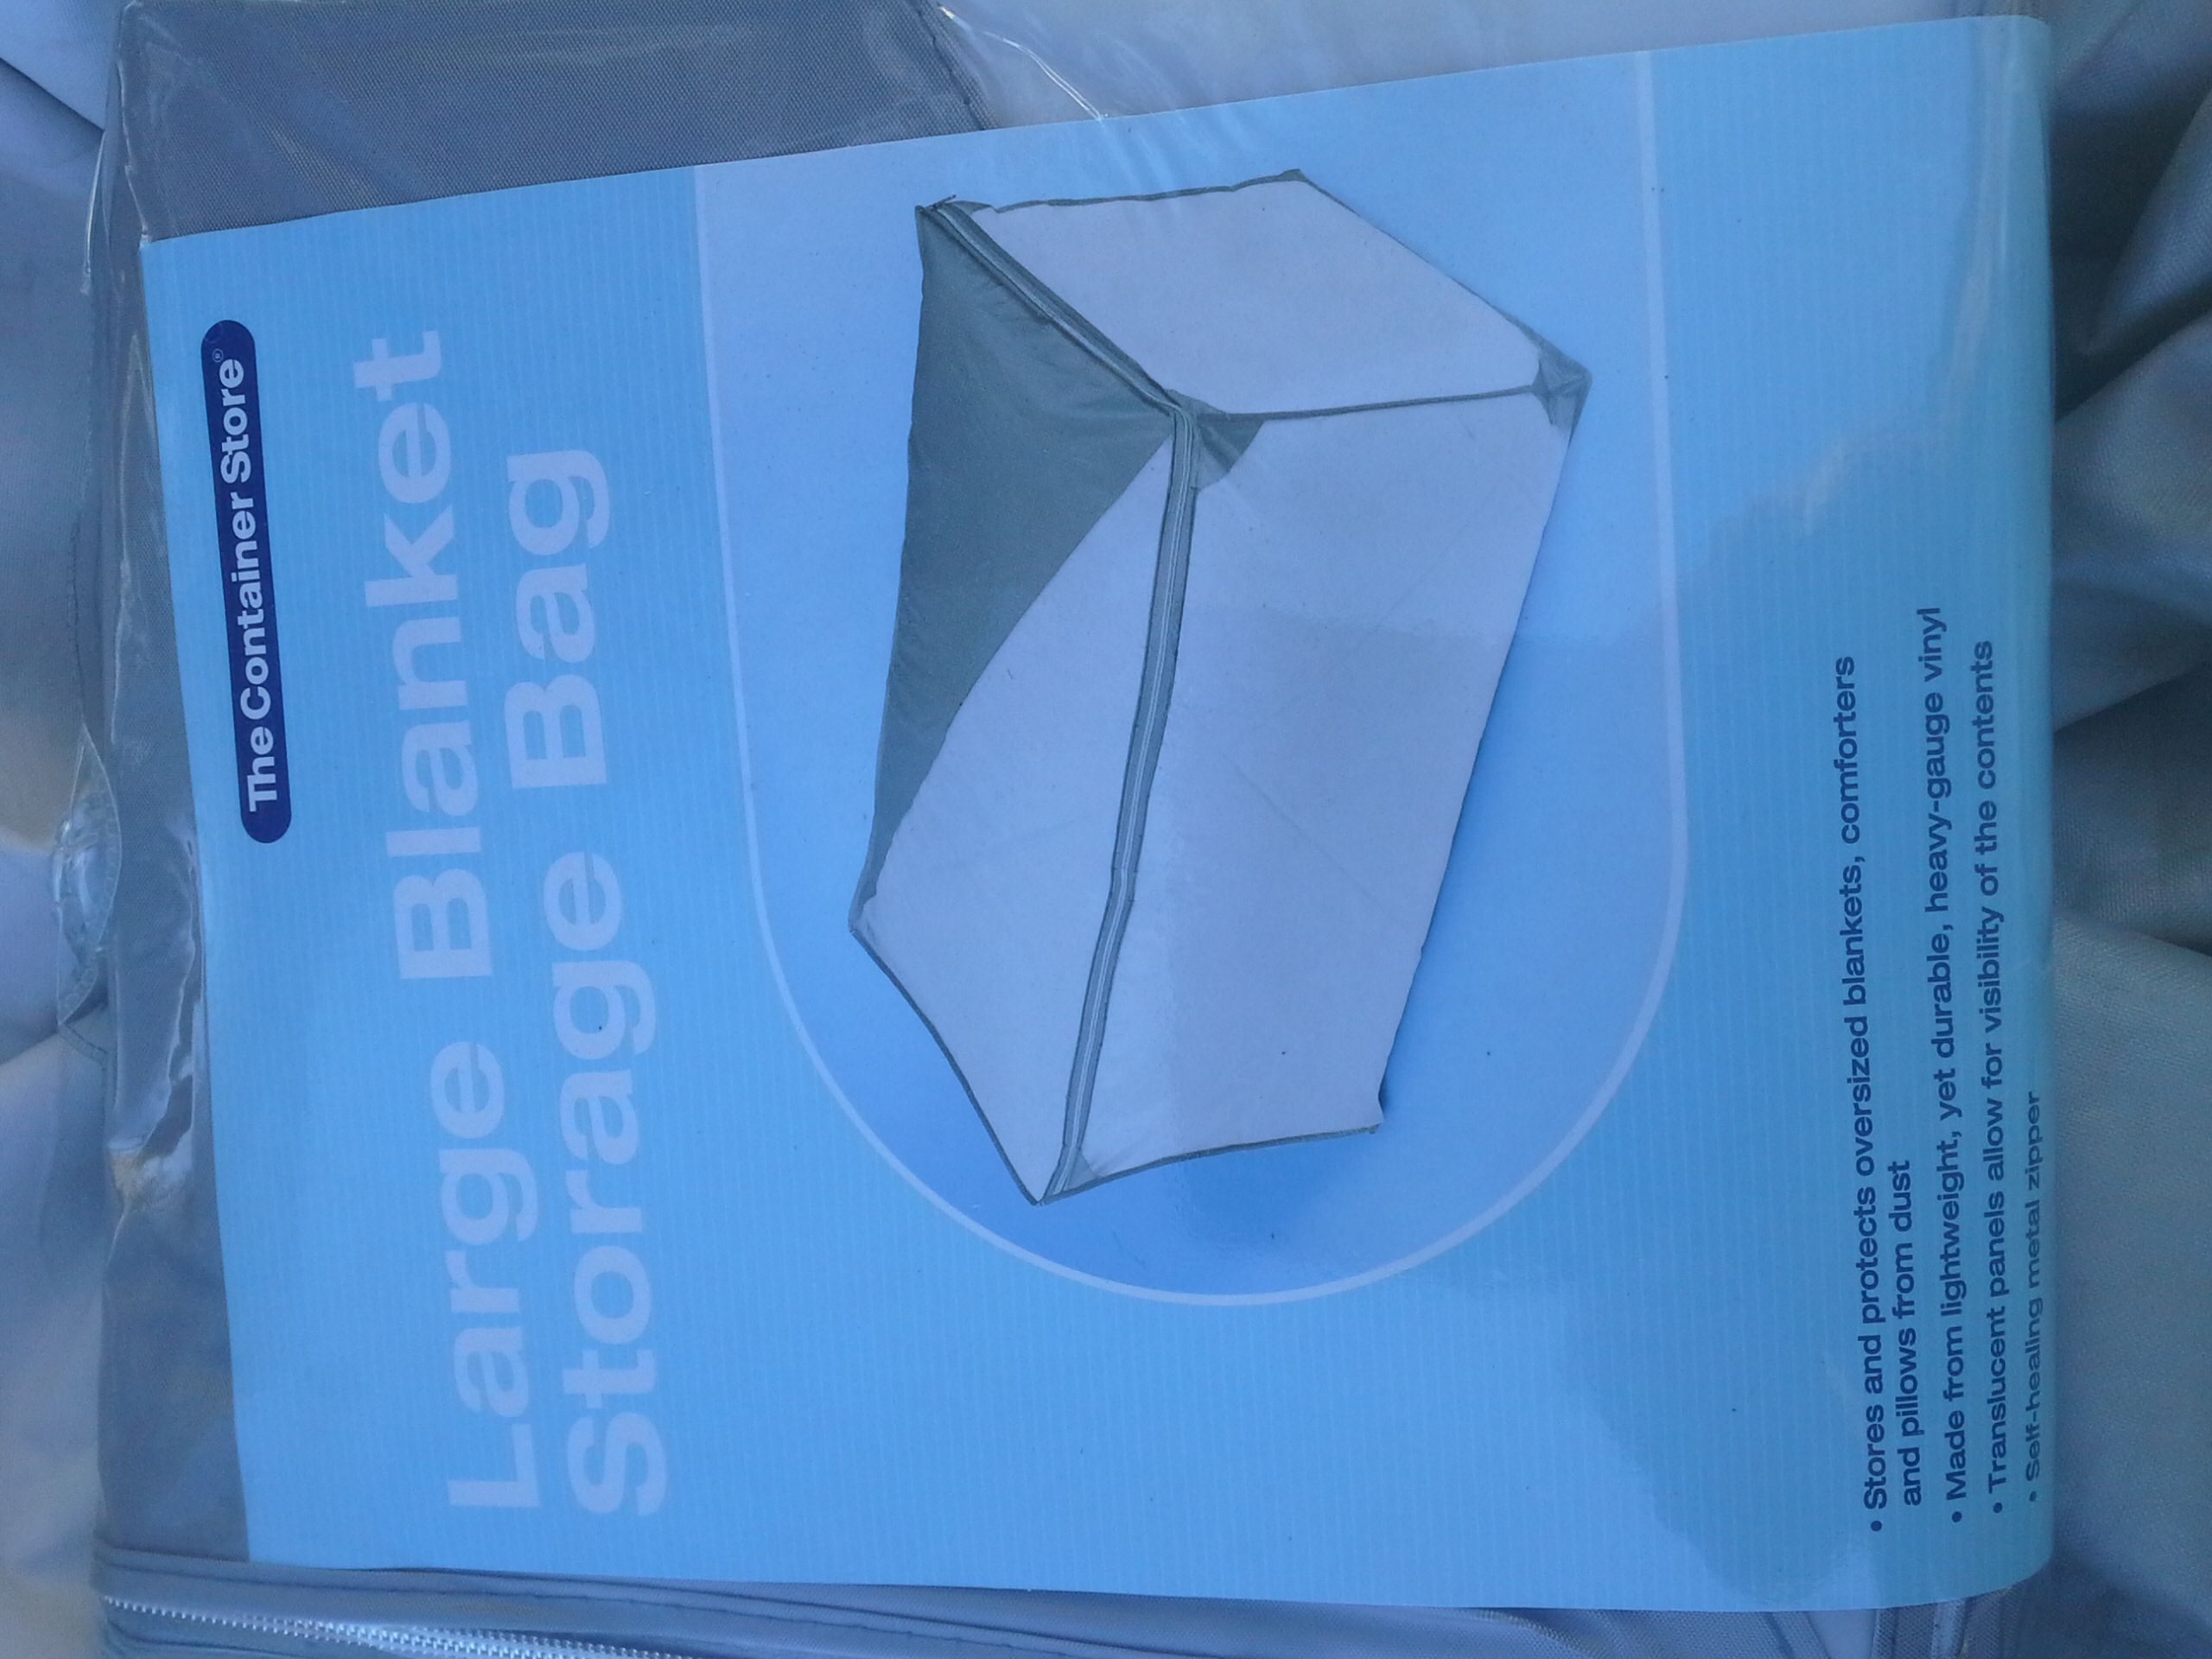 Large Blanket Storage Bag - The Container Store - 3 for $10